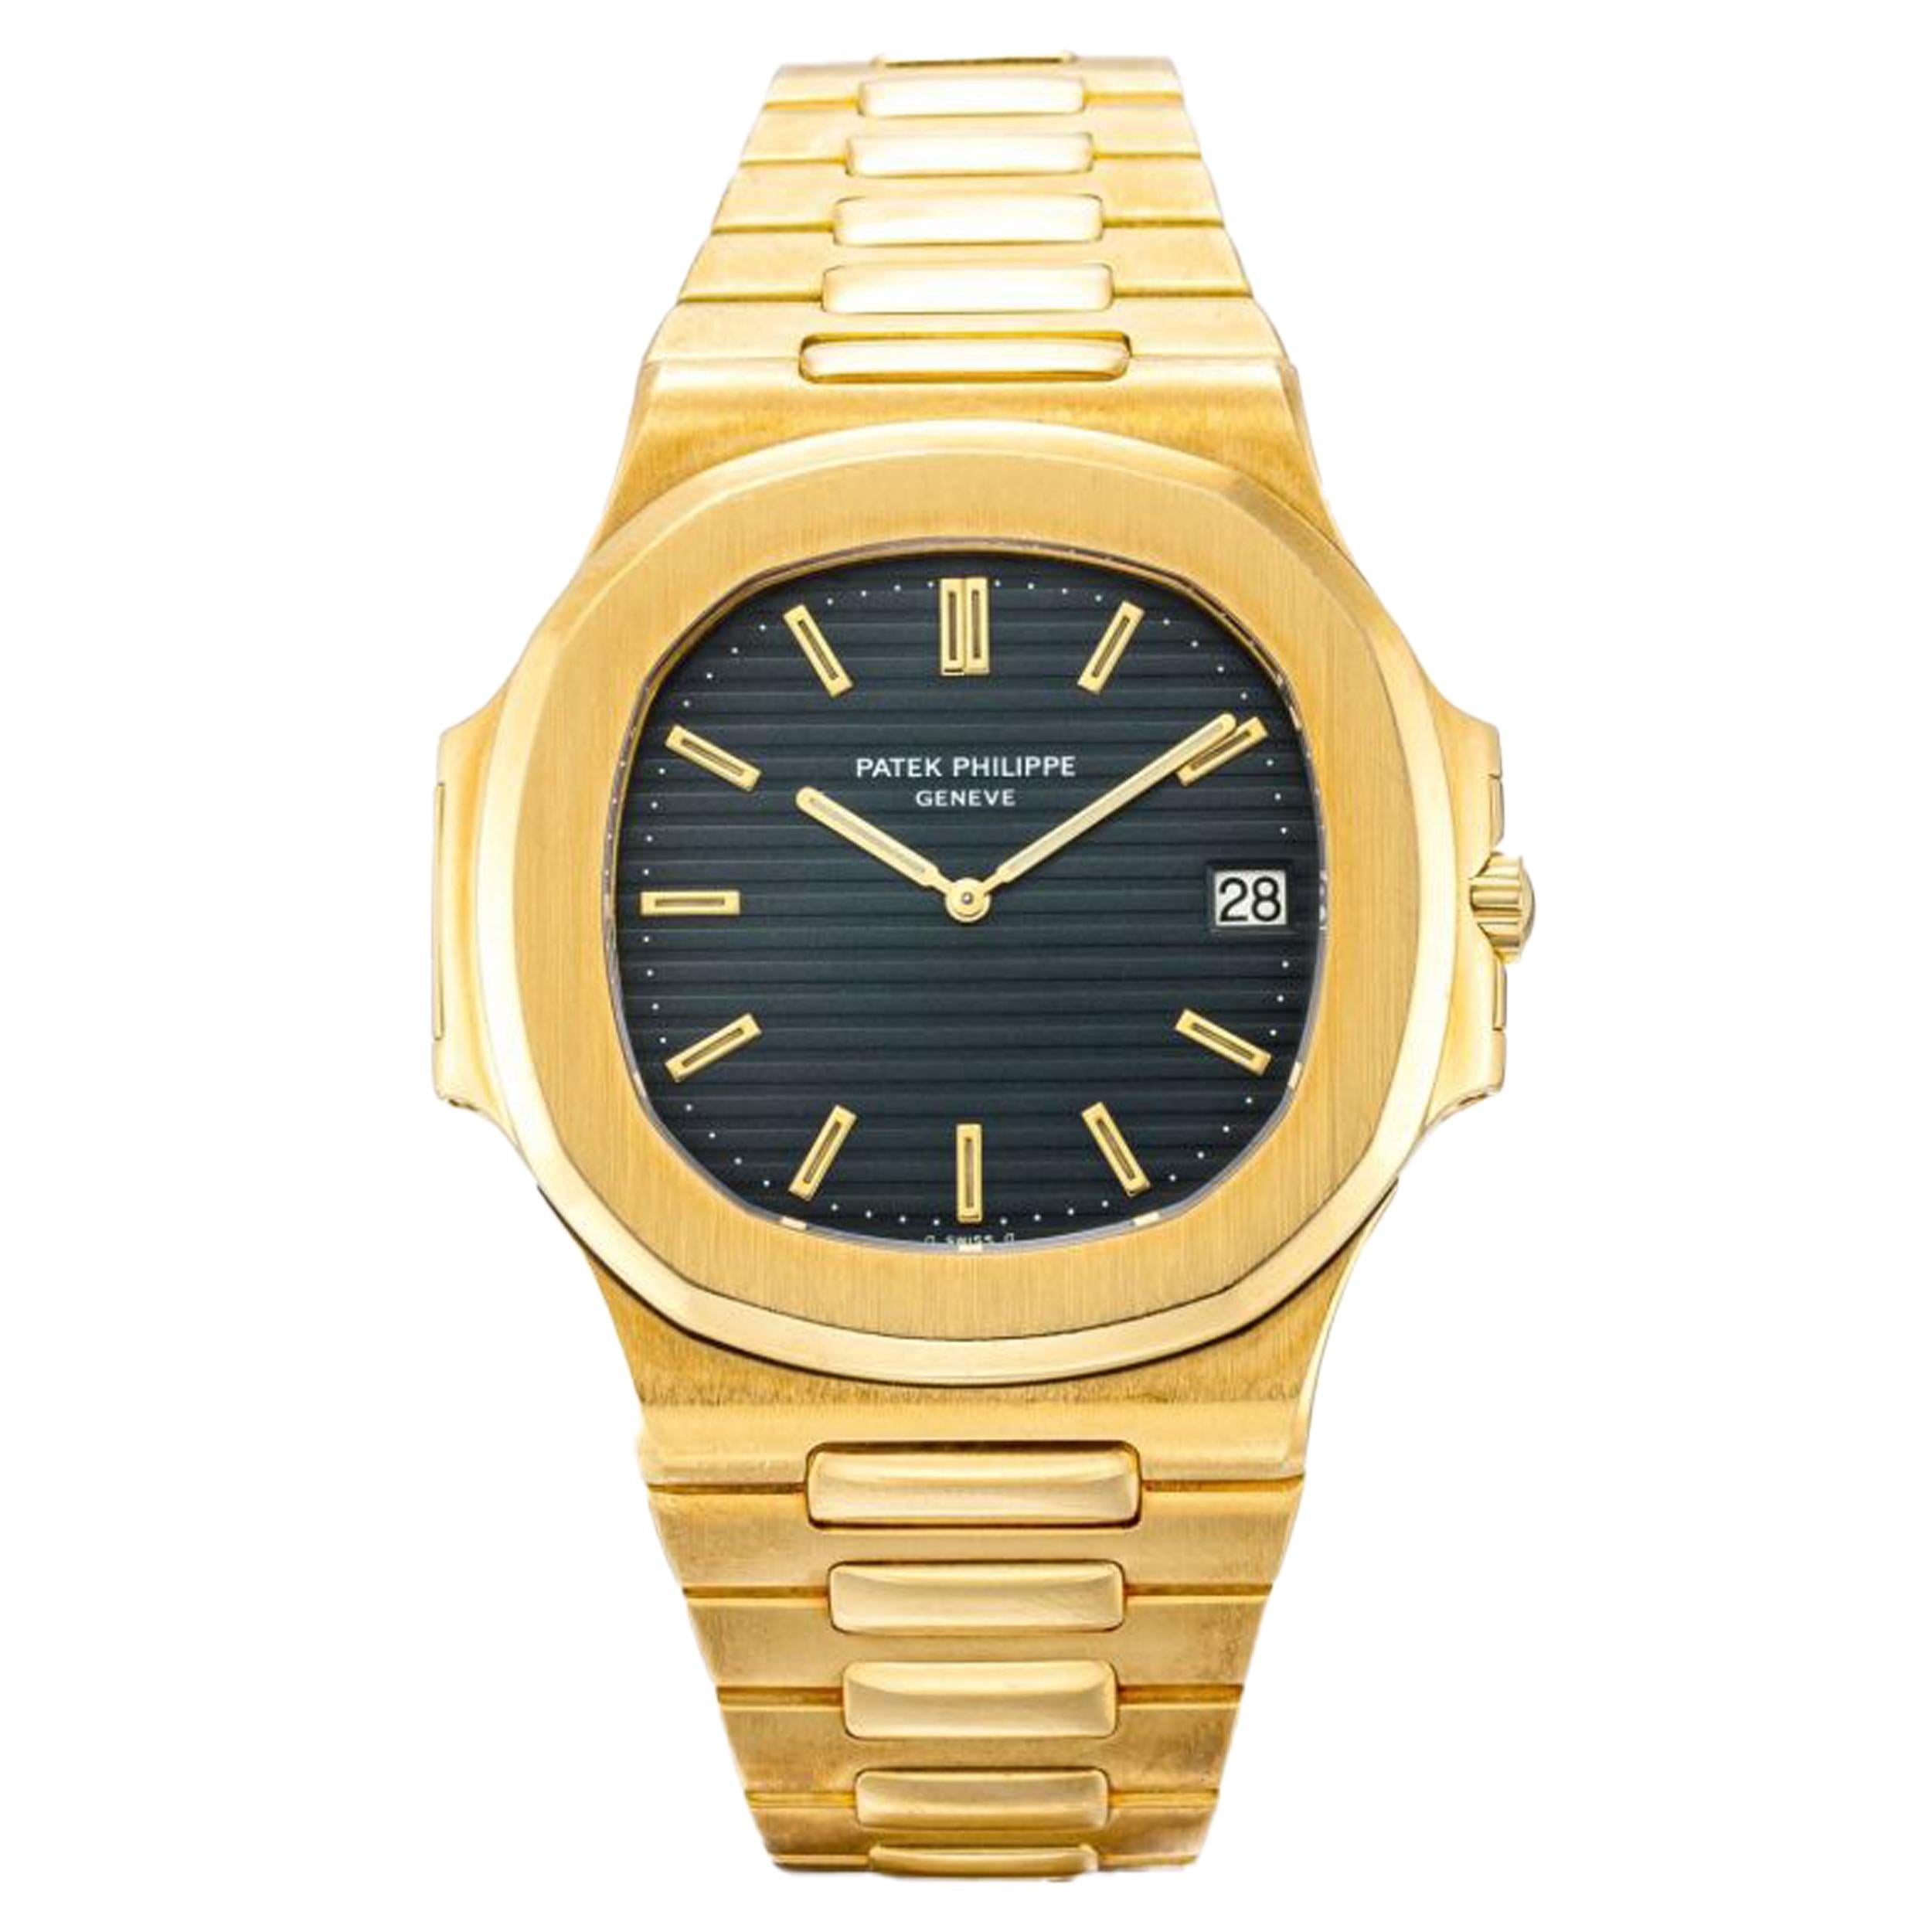 Movement: automatic
Function: hours, minutes, date
Case: 39.5mm 18K yellow gold round case, smooth bezel, sapphire crystal, push pull crown
Band: Patek Philippe 18K yellow gold bracelet, 18k yellow gold integrated clasp
Dial: black stick
Reference: